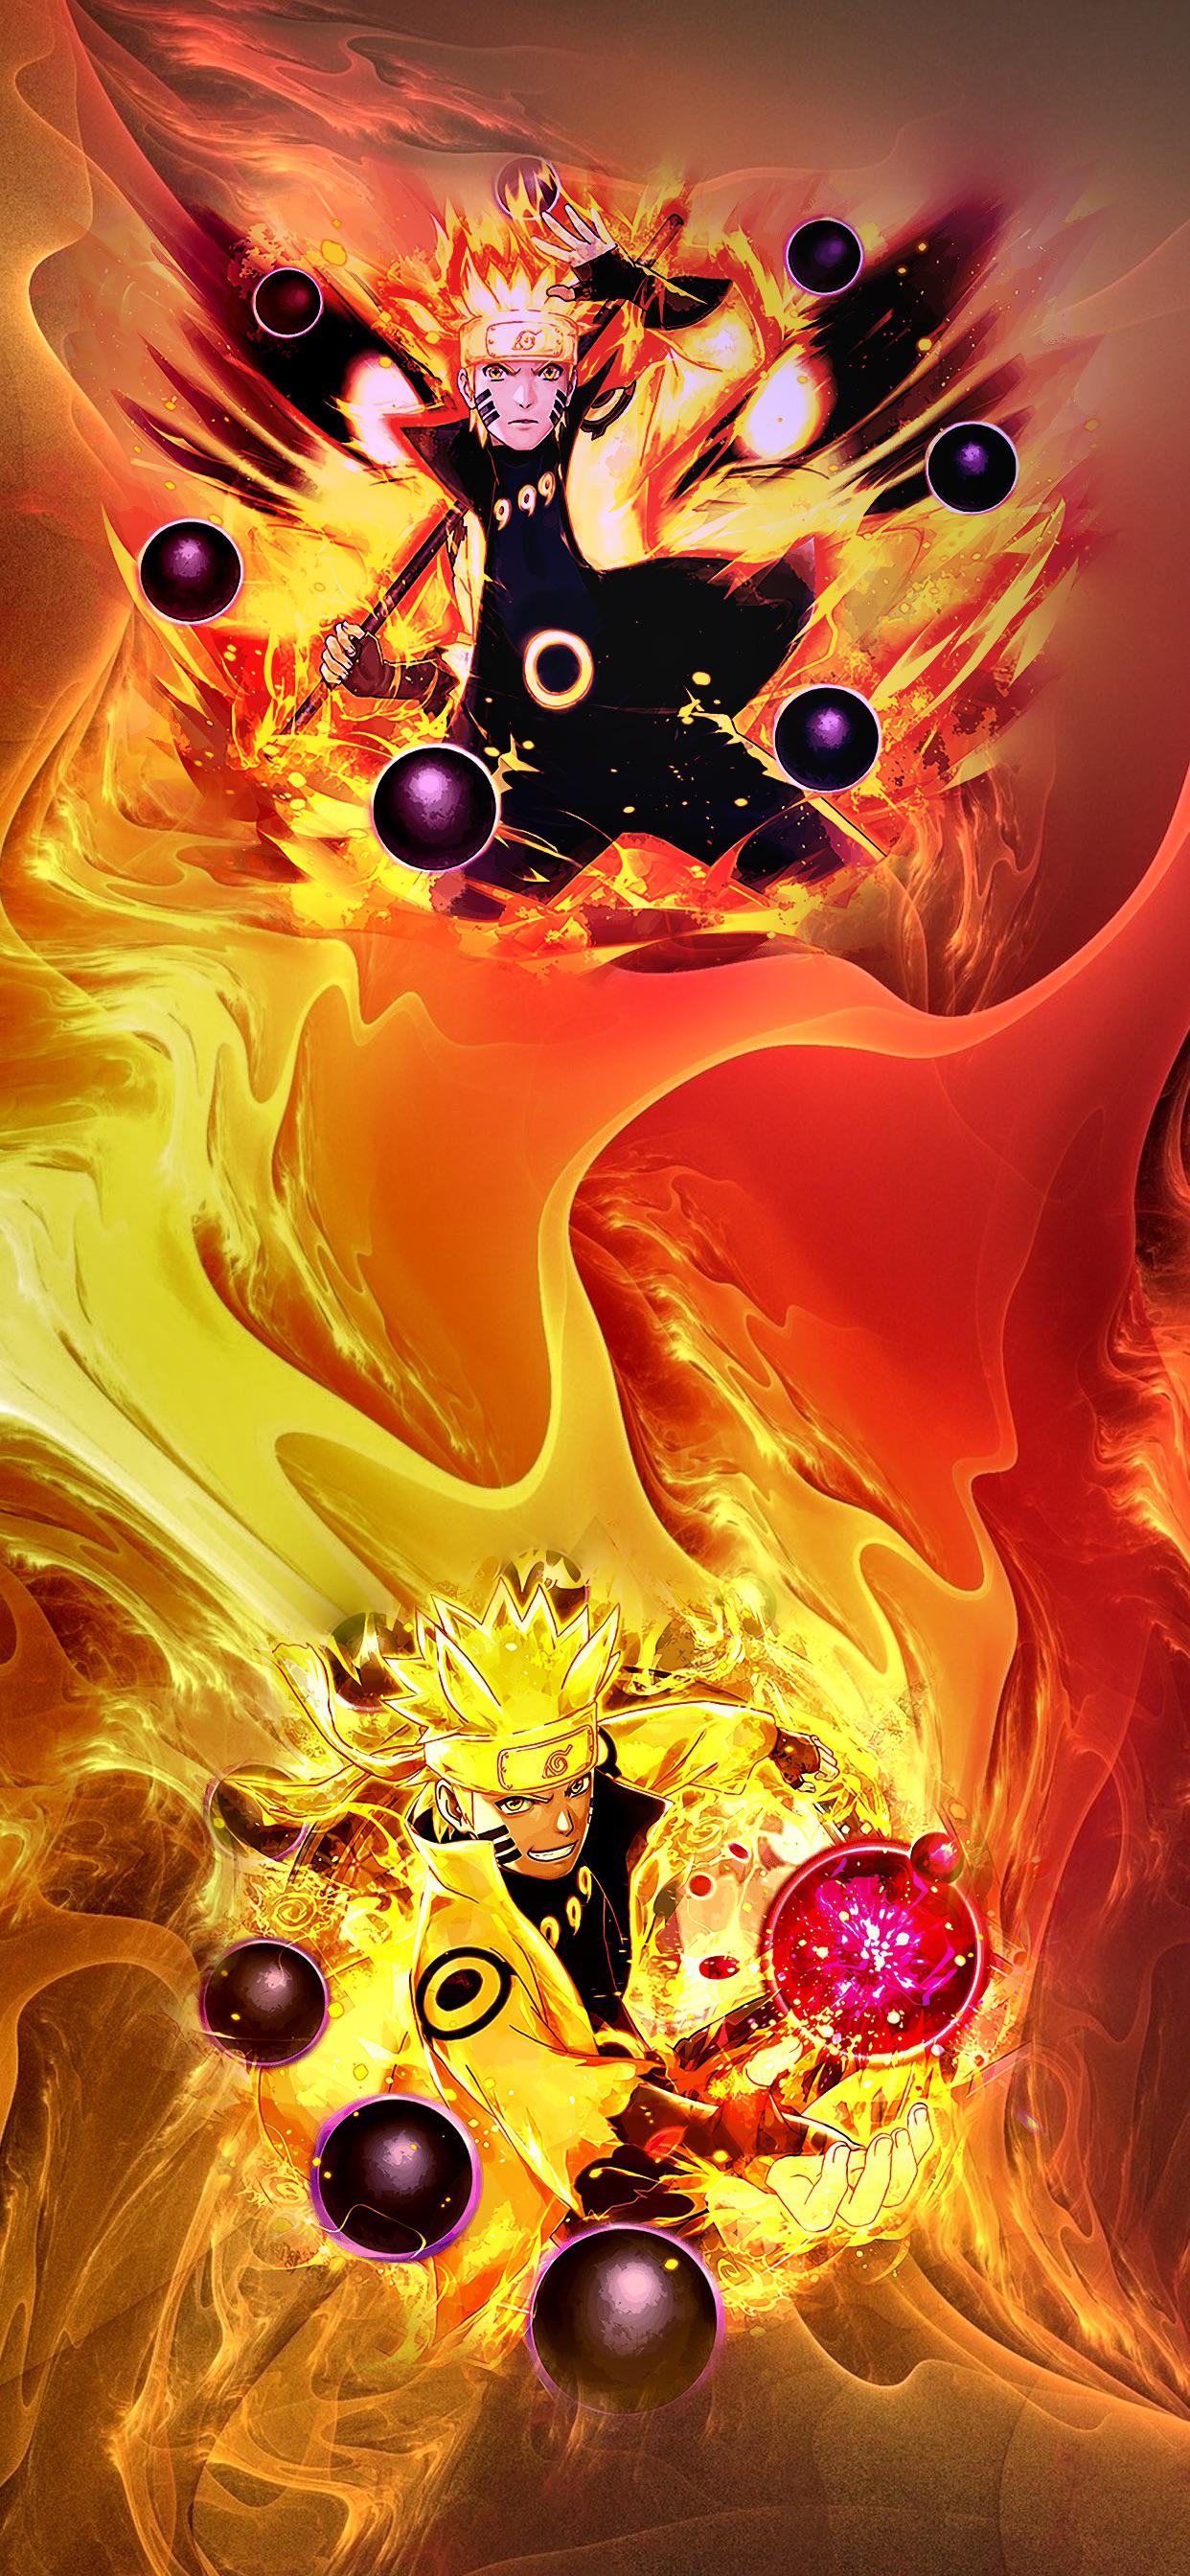 Made a naruto blazing iphone wallpaper, what do you think?? More versions in comments